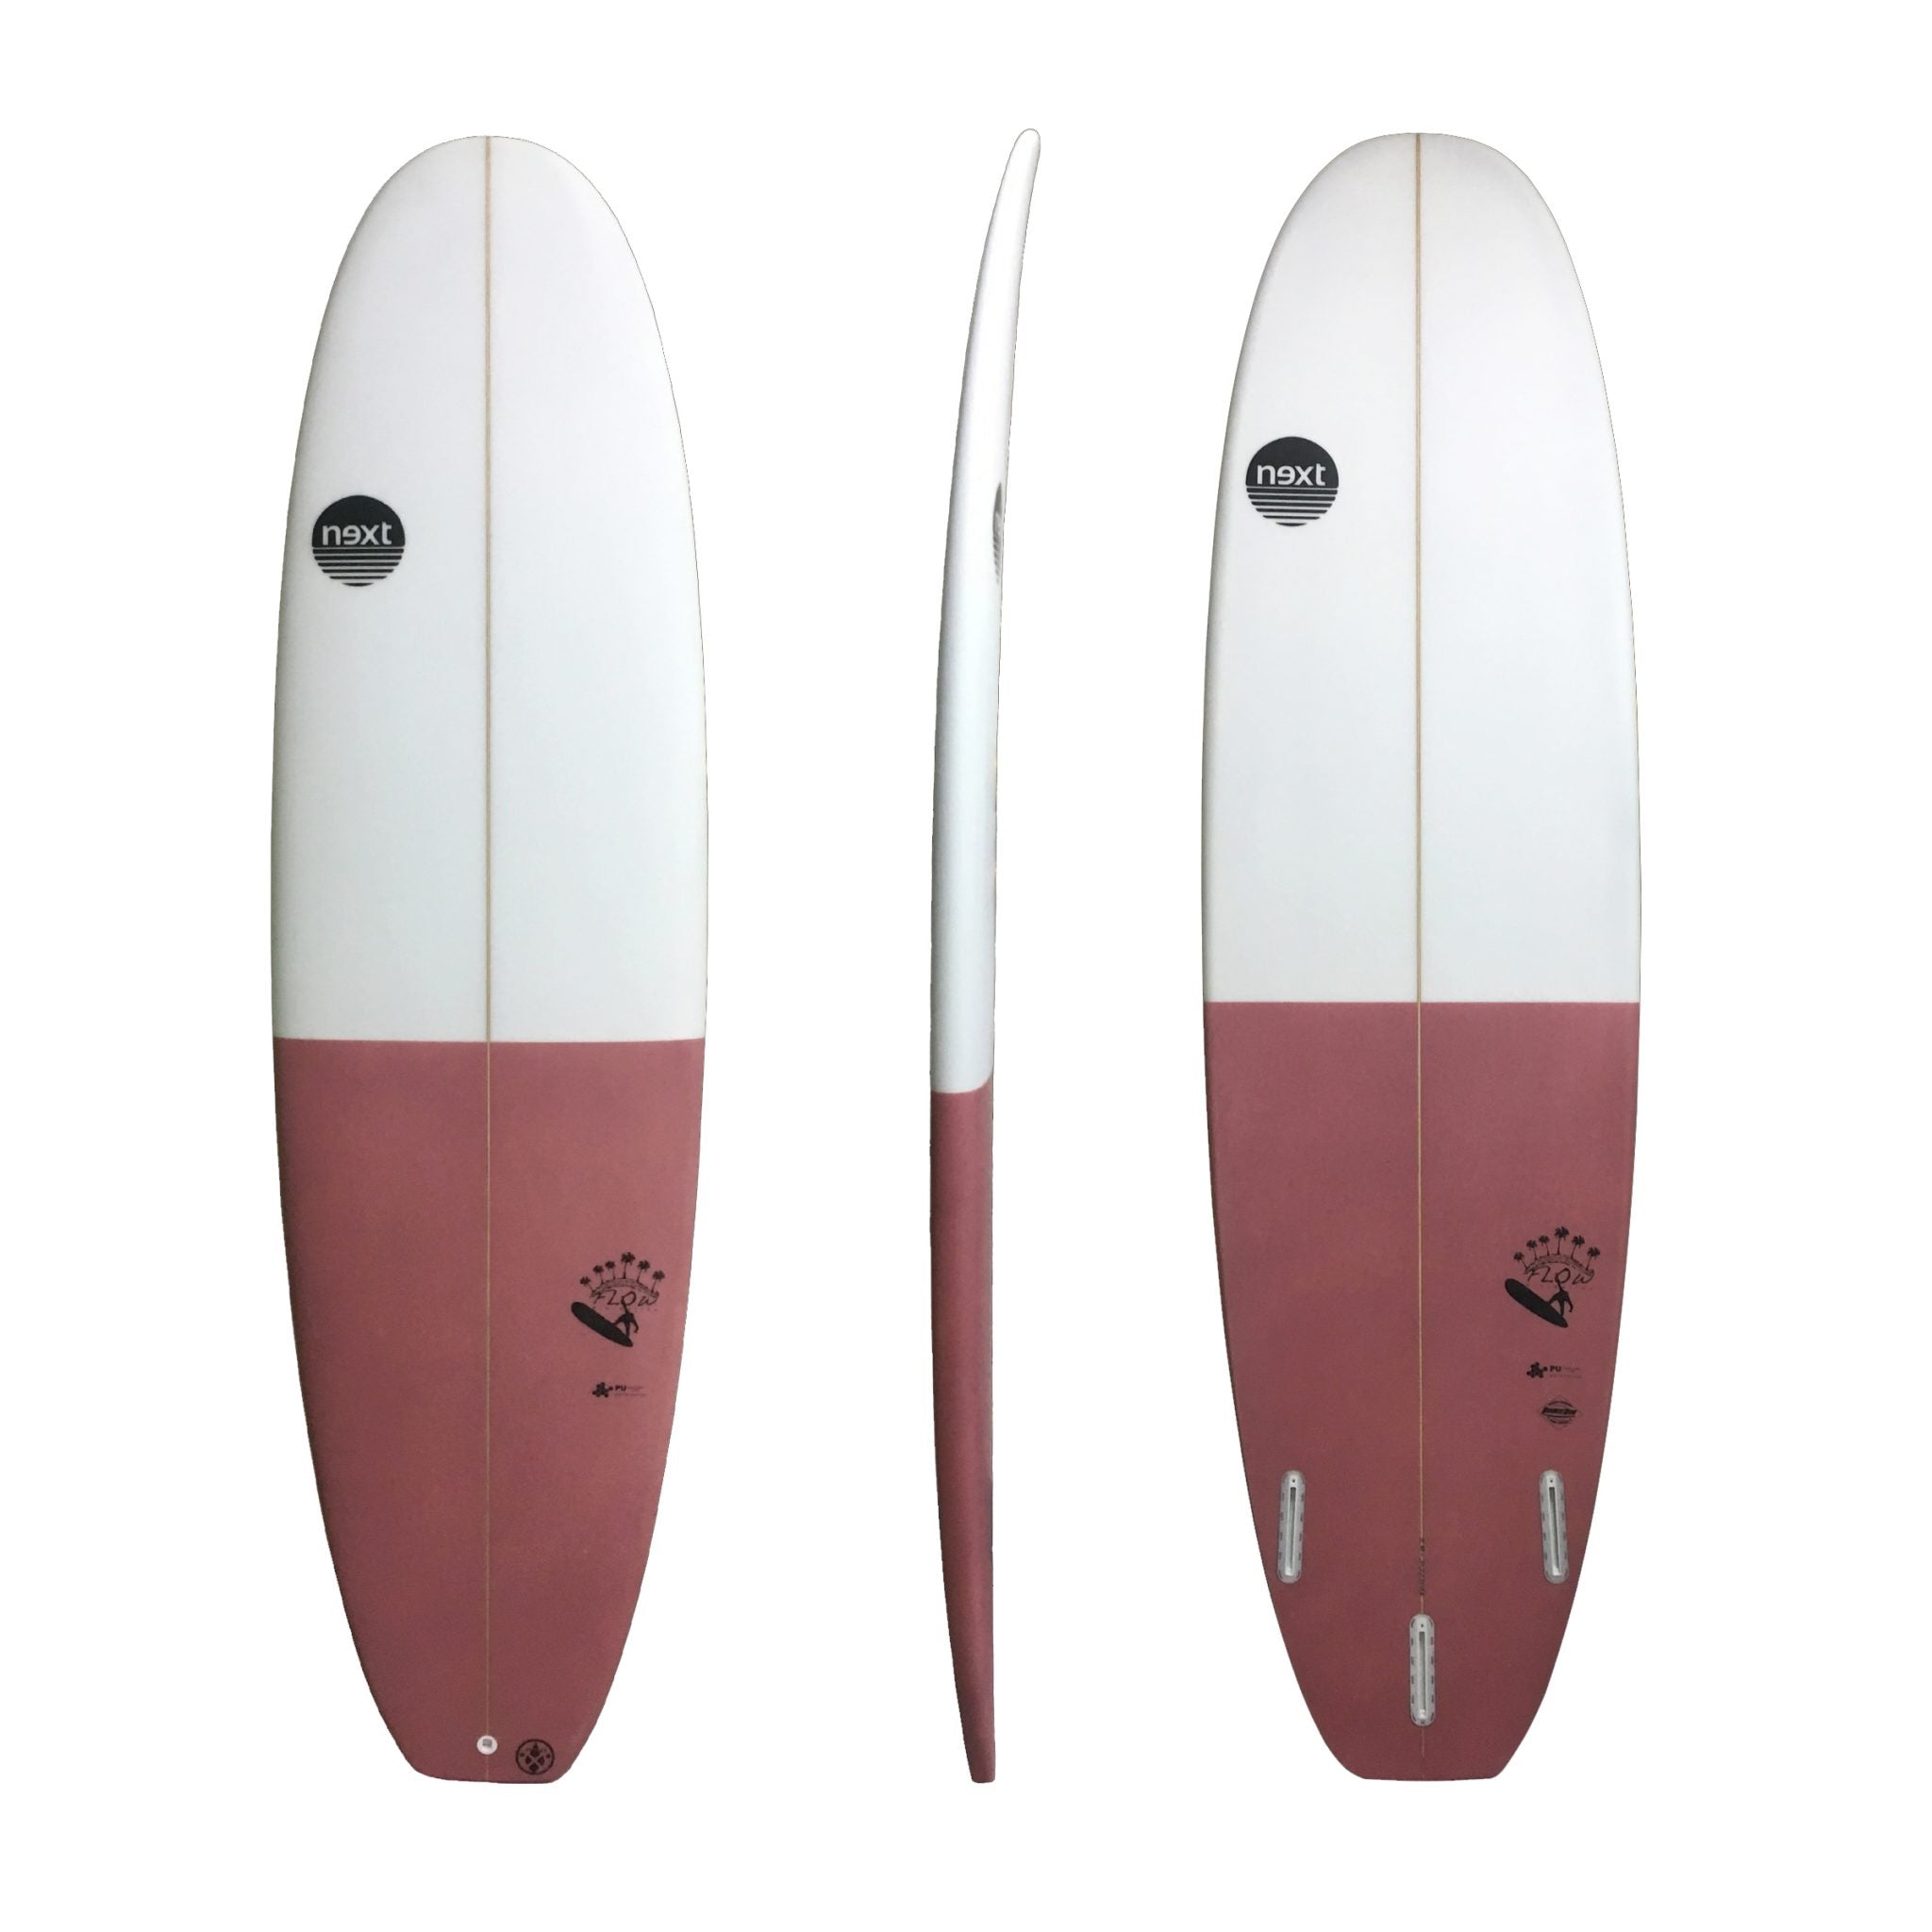 Next Flow 7ft 4 EPS Mini Mal Surfboard Futures Mauvewood - Boards360